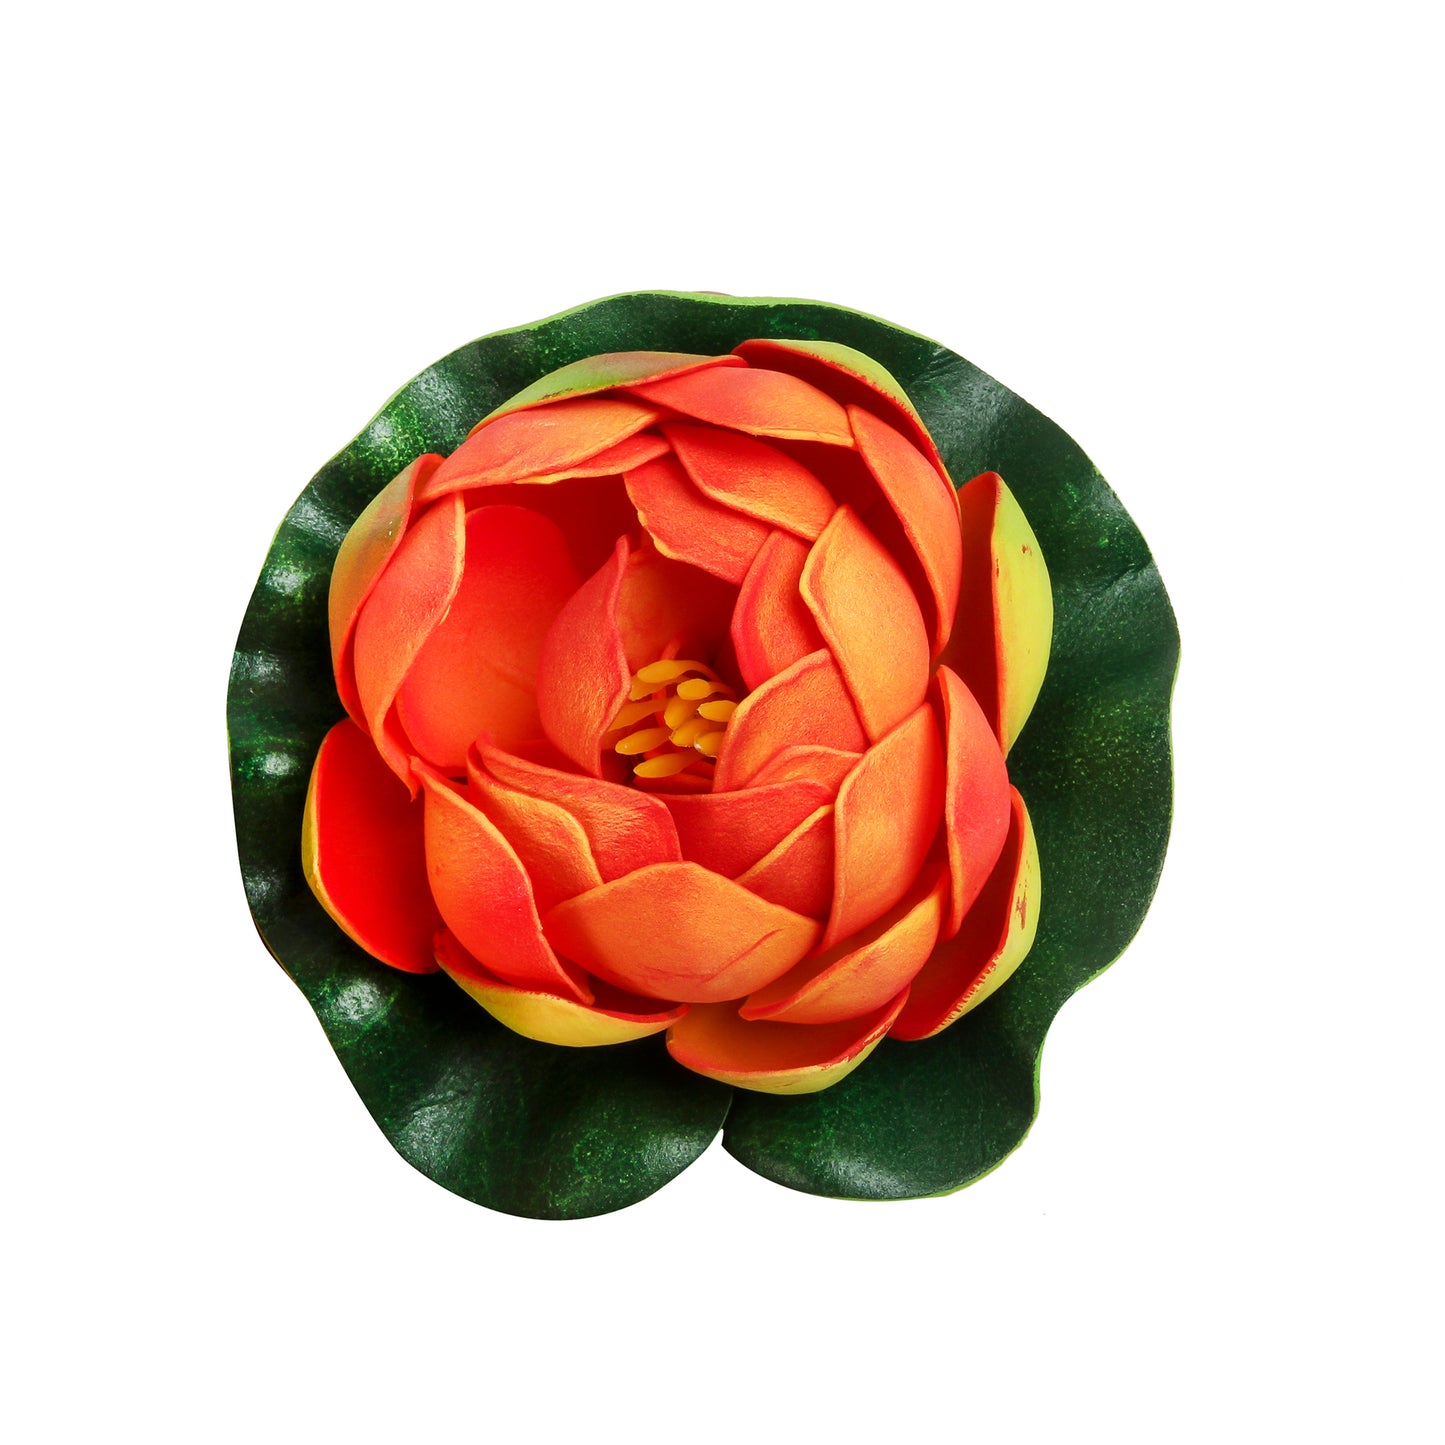 Akaar Set of 5 Floating Lotus for festive décor (Assorted colors)